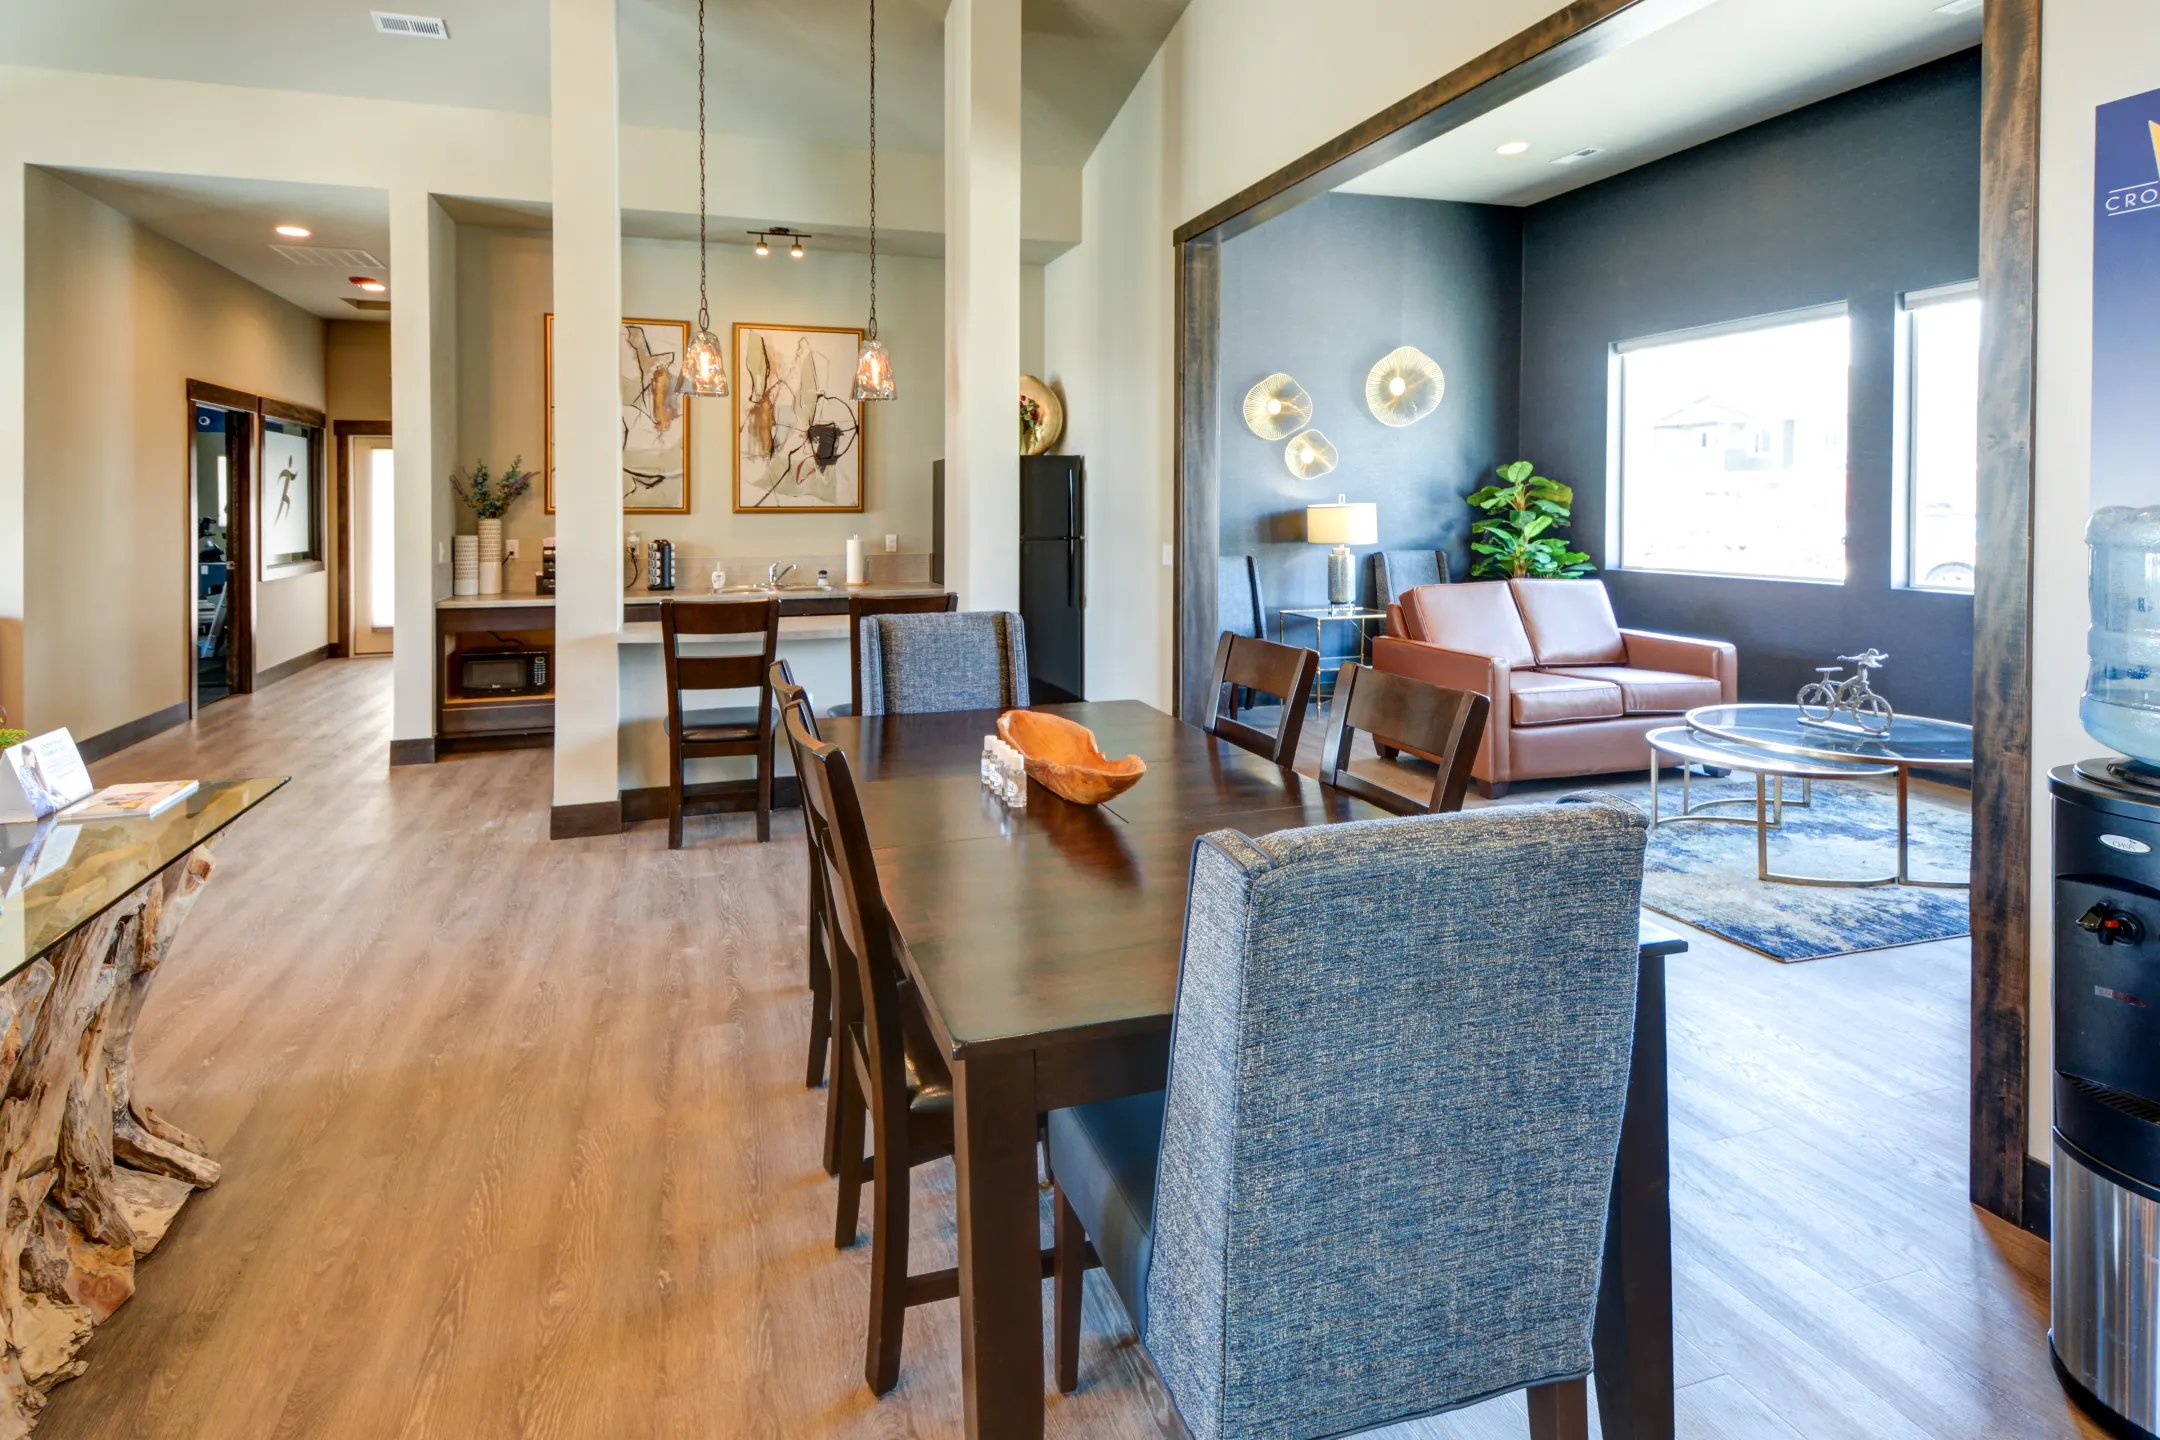 Dining Room - Crown Pointe Apartments - Post Falls, ID